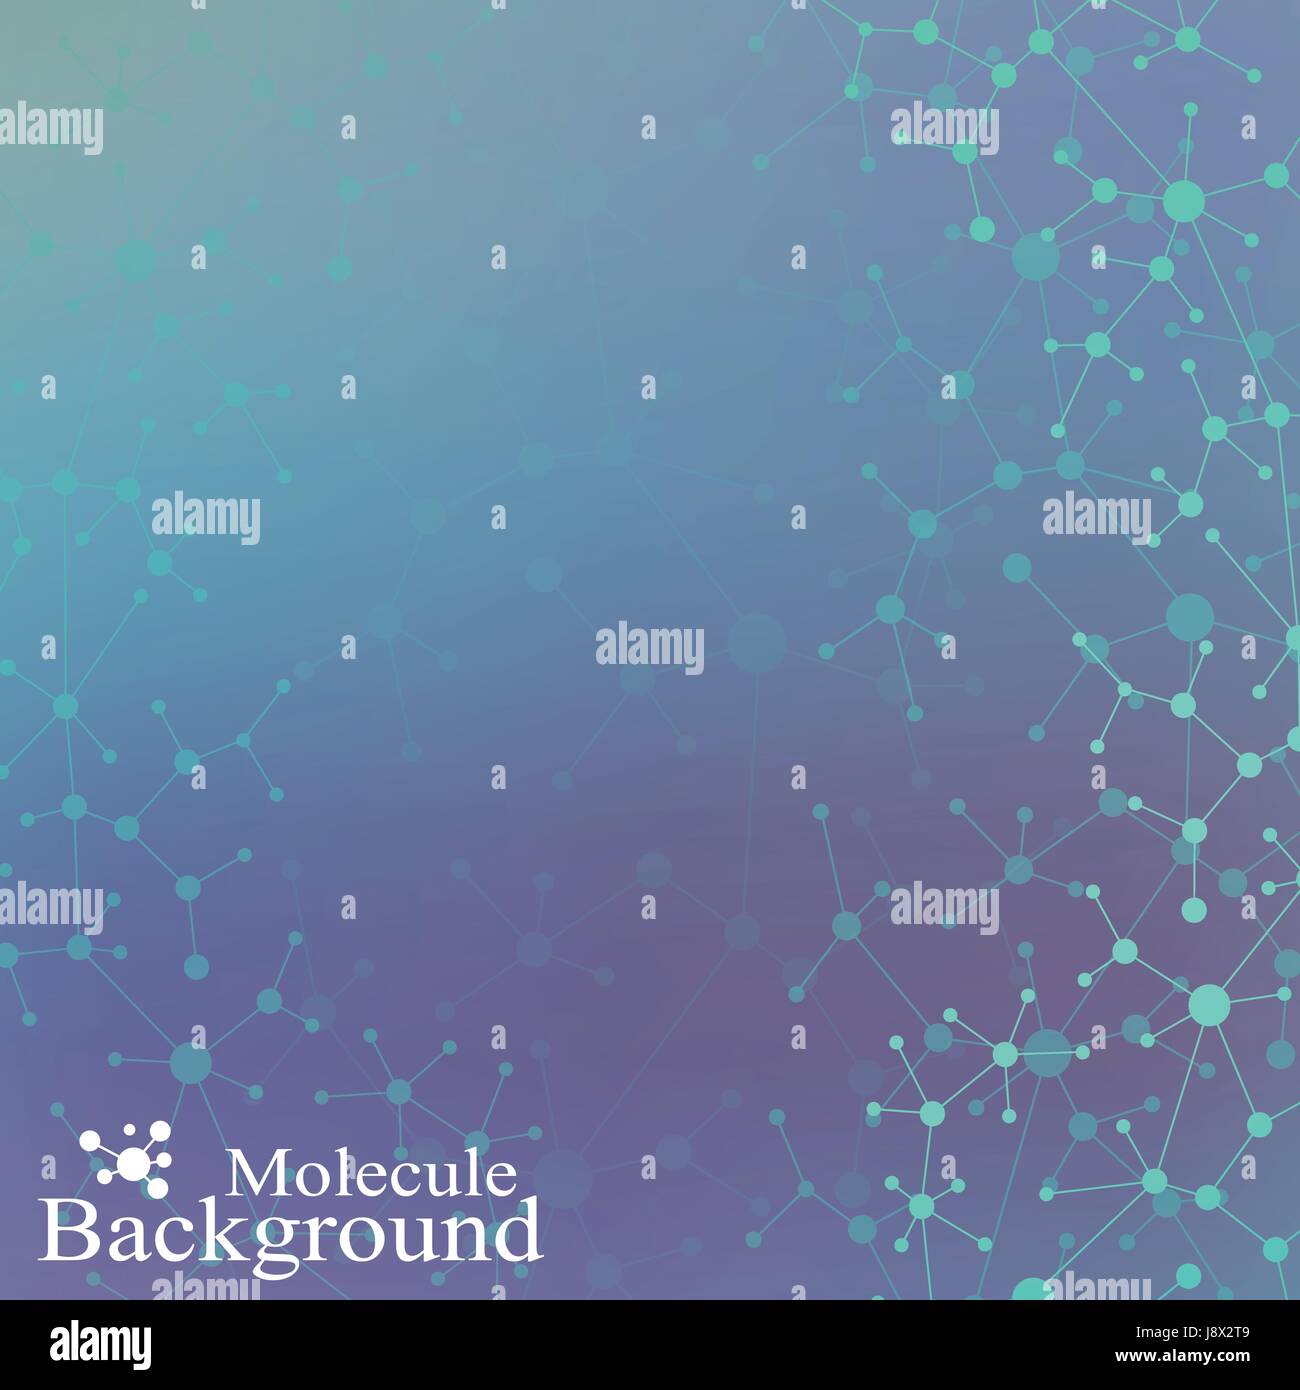 Molecule structure dna and communication background. Connected lines with dots. Concept of the science, connection, chemistry, biology, medicine, technology. Vector illustration Stock Vector